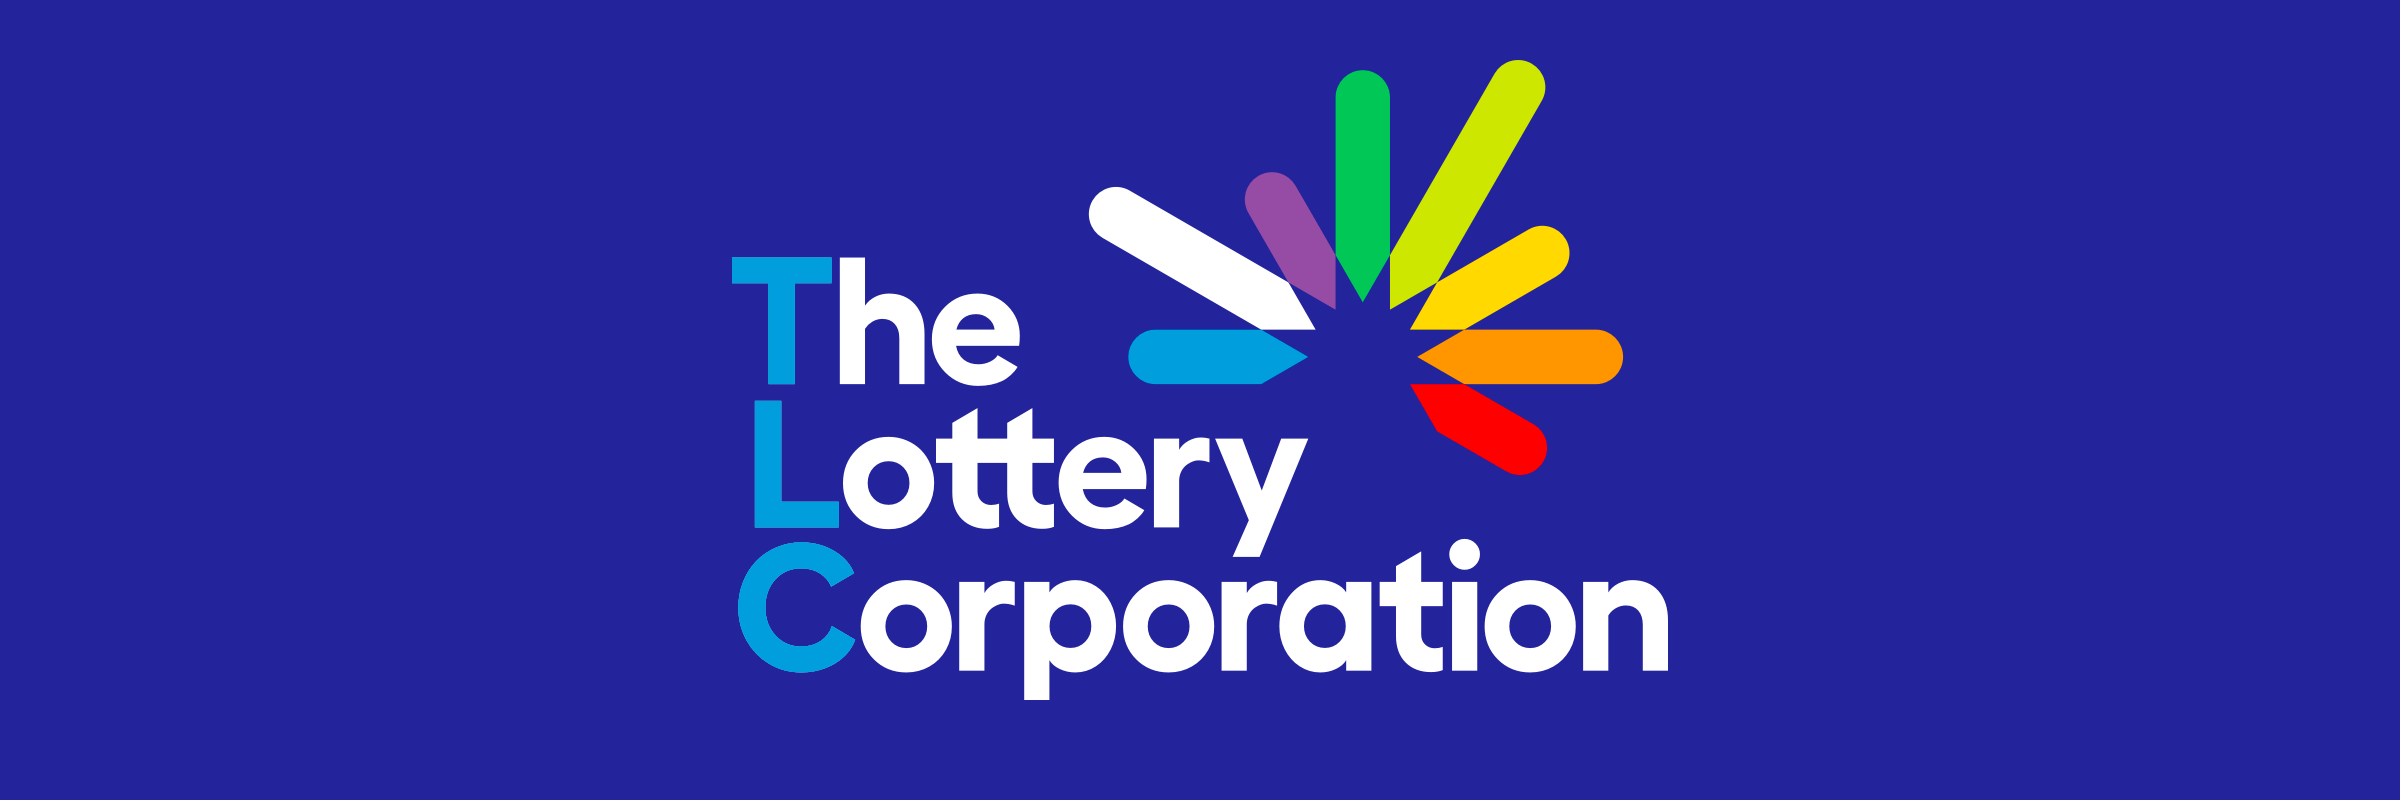 Demerged Lotteries and Keno company to be named The Lottery Corporation<sup>&trade;</sup> Hero Image